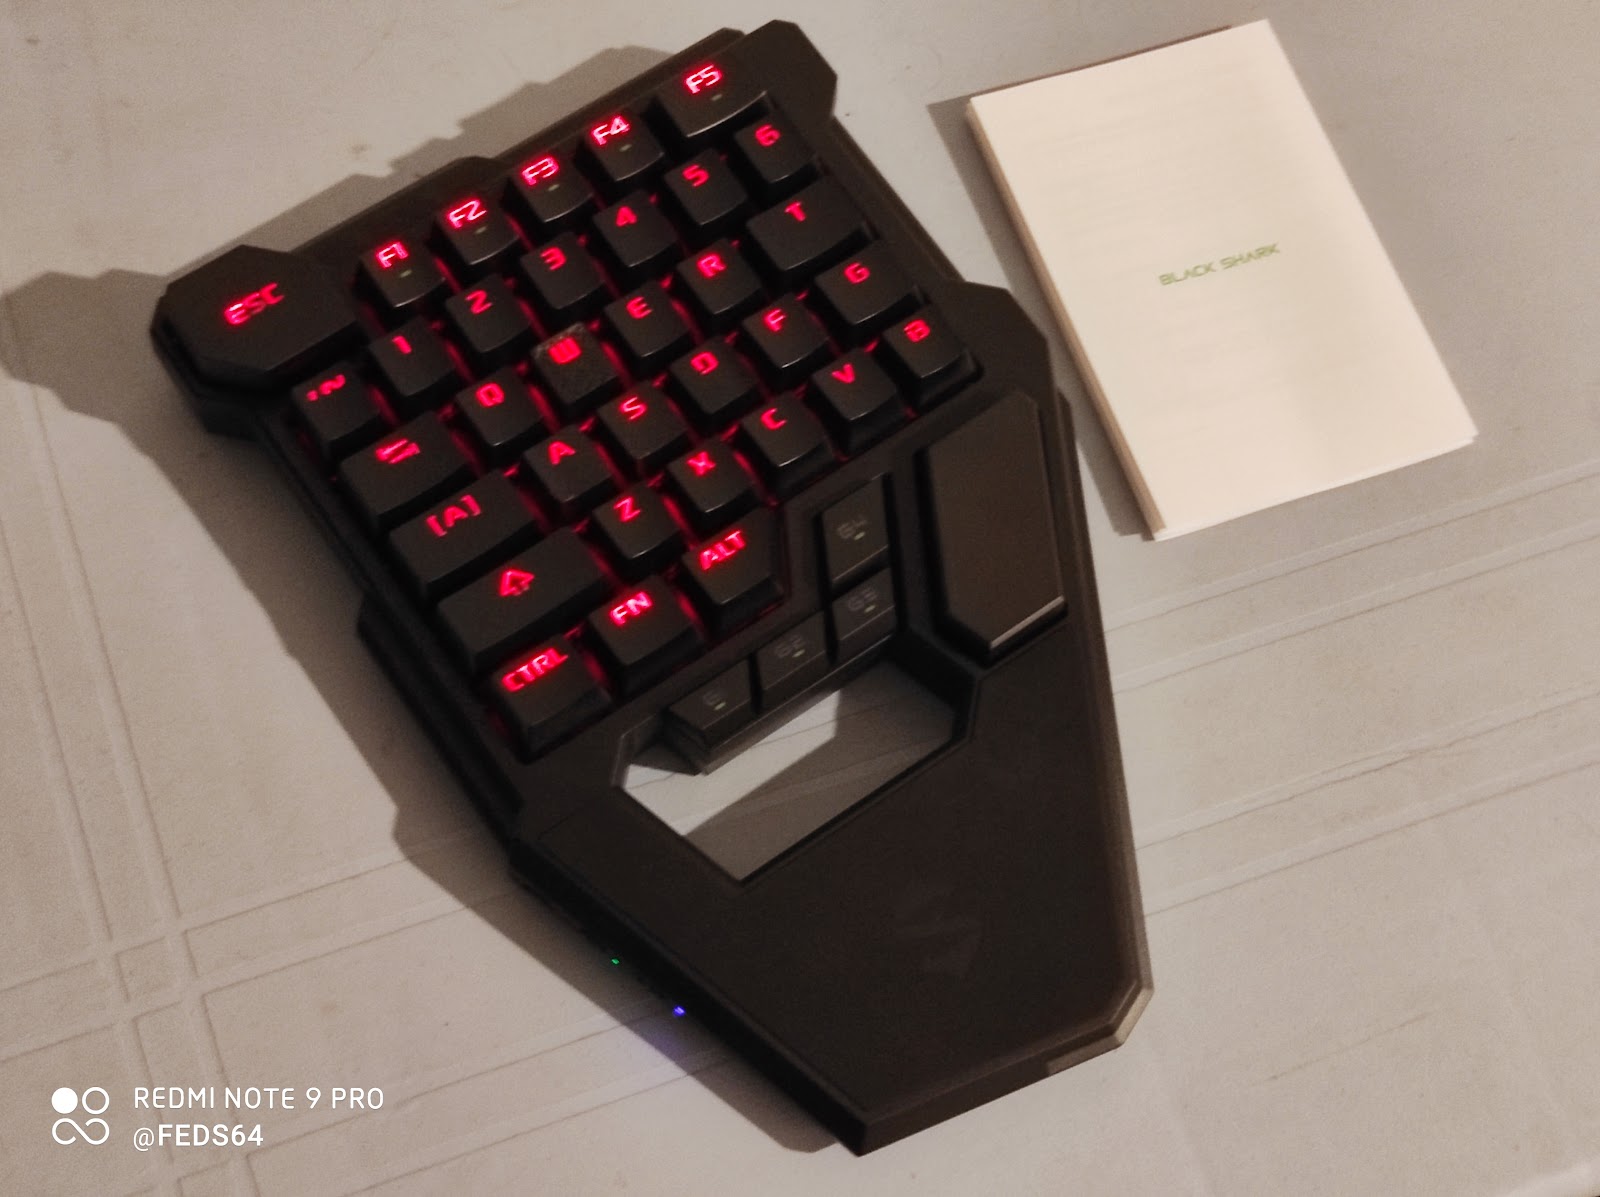 Step-up Your Gaming With Black Shark Mechanical Gaming Keyboard - Mi  Gadgets - Xiaomi Community - Xiaomi